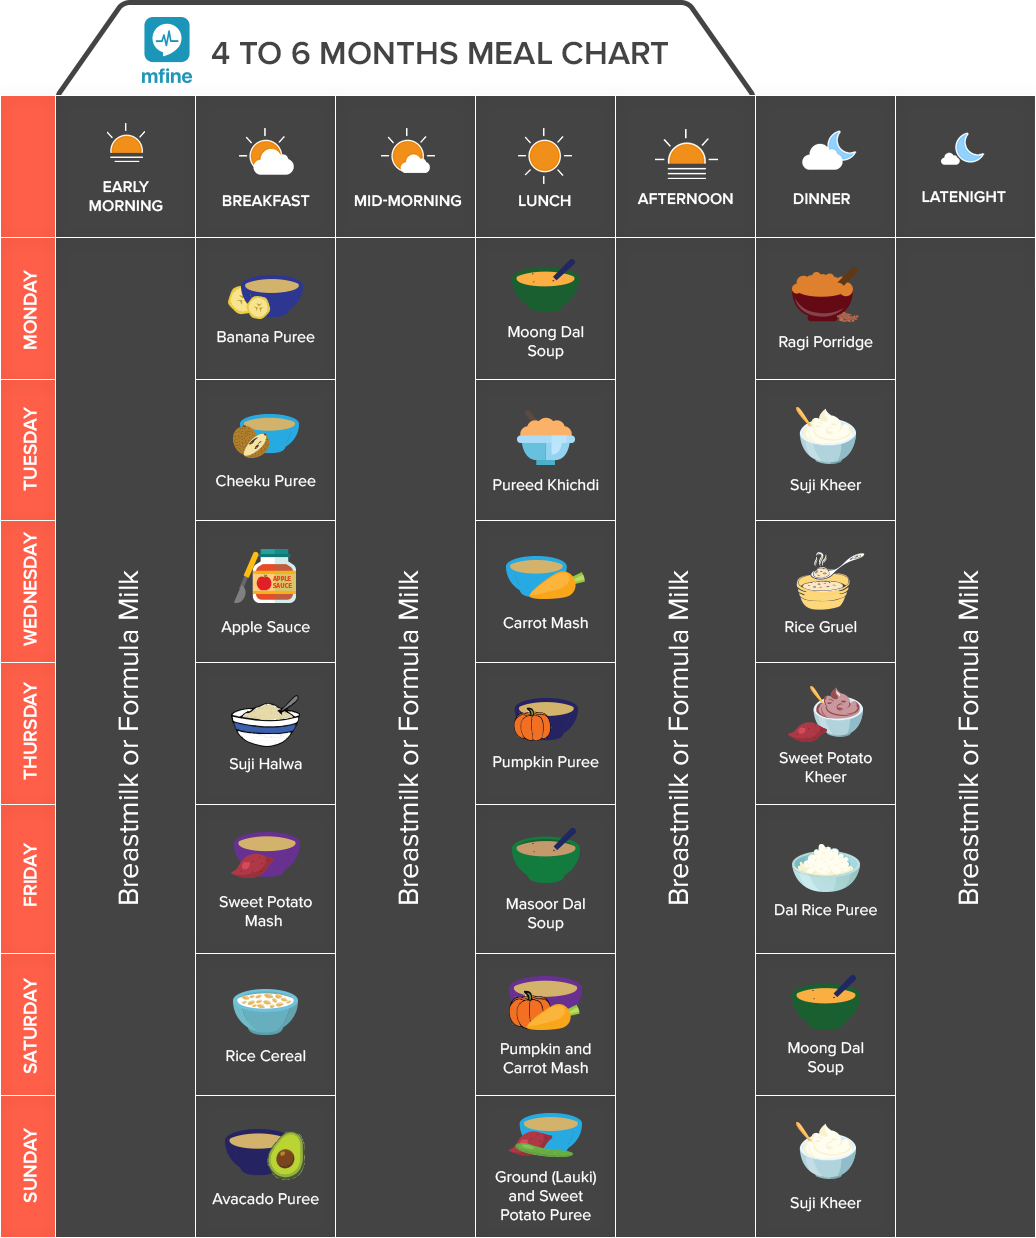 https://www.mfine.co/wp-content/themes/Divi/images/food_chart_4-_to_6_months_meal_chart.png